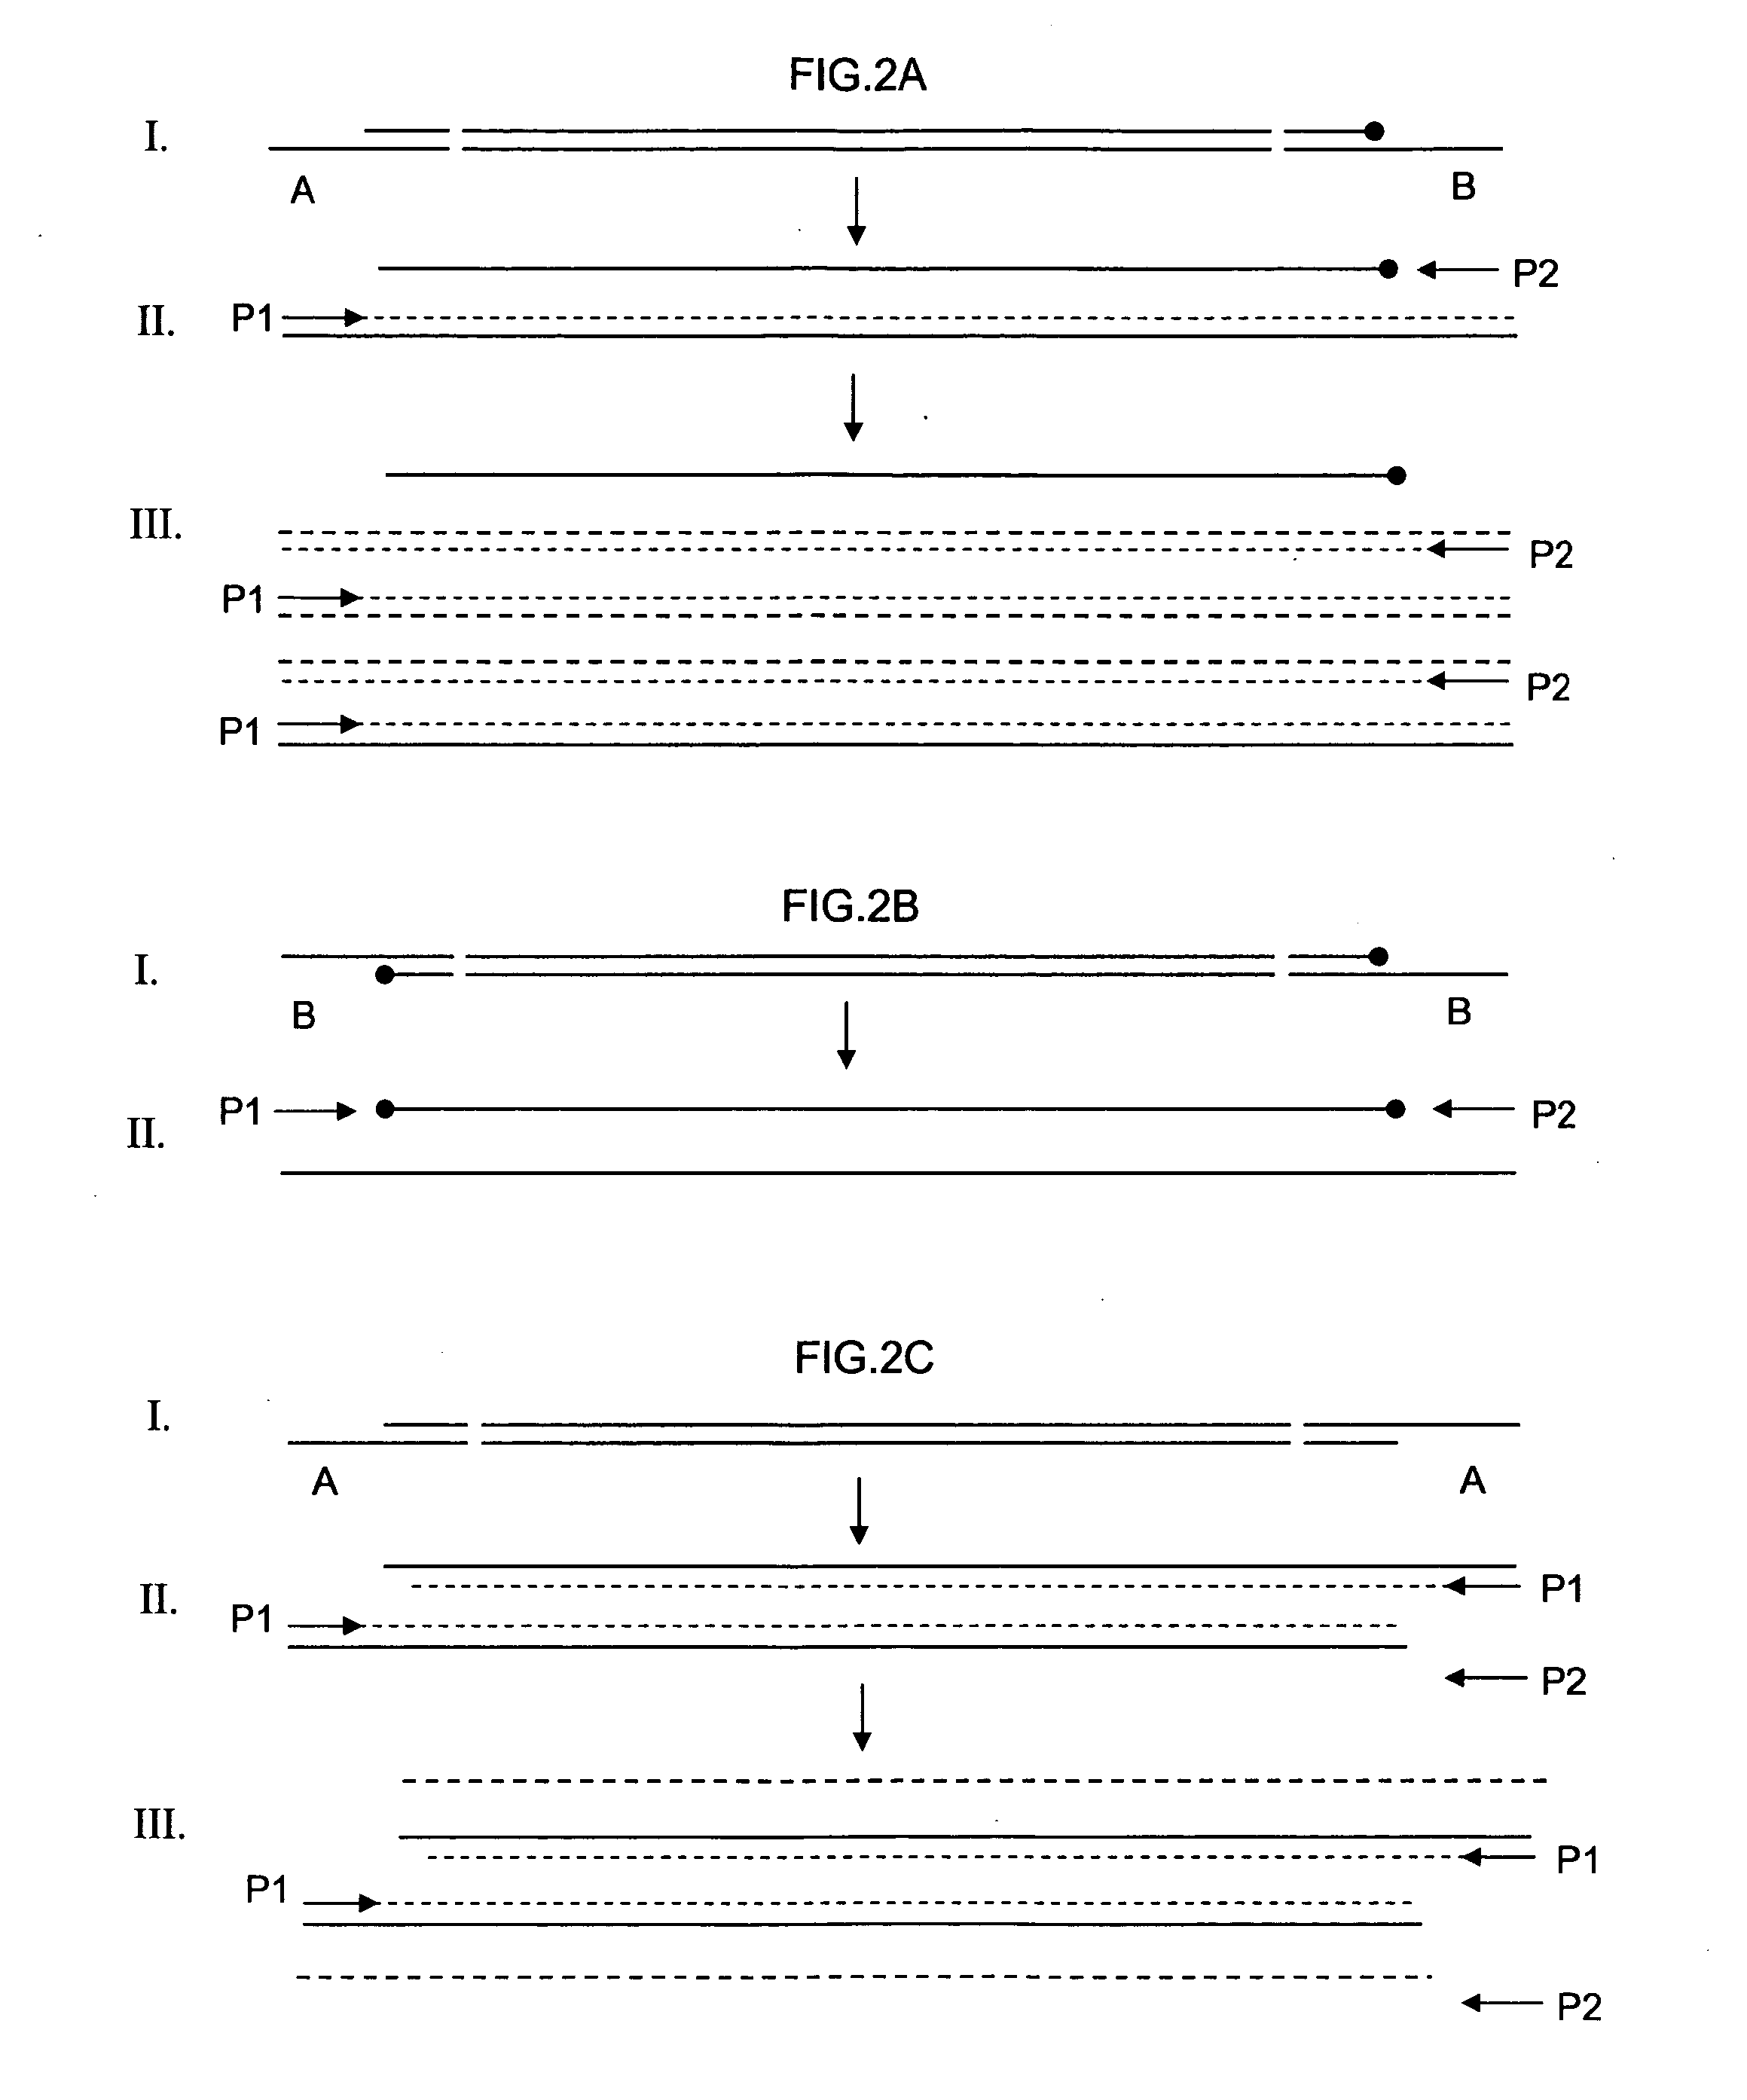 Asymmetrical Adapters And Methods Of Use Thereof